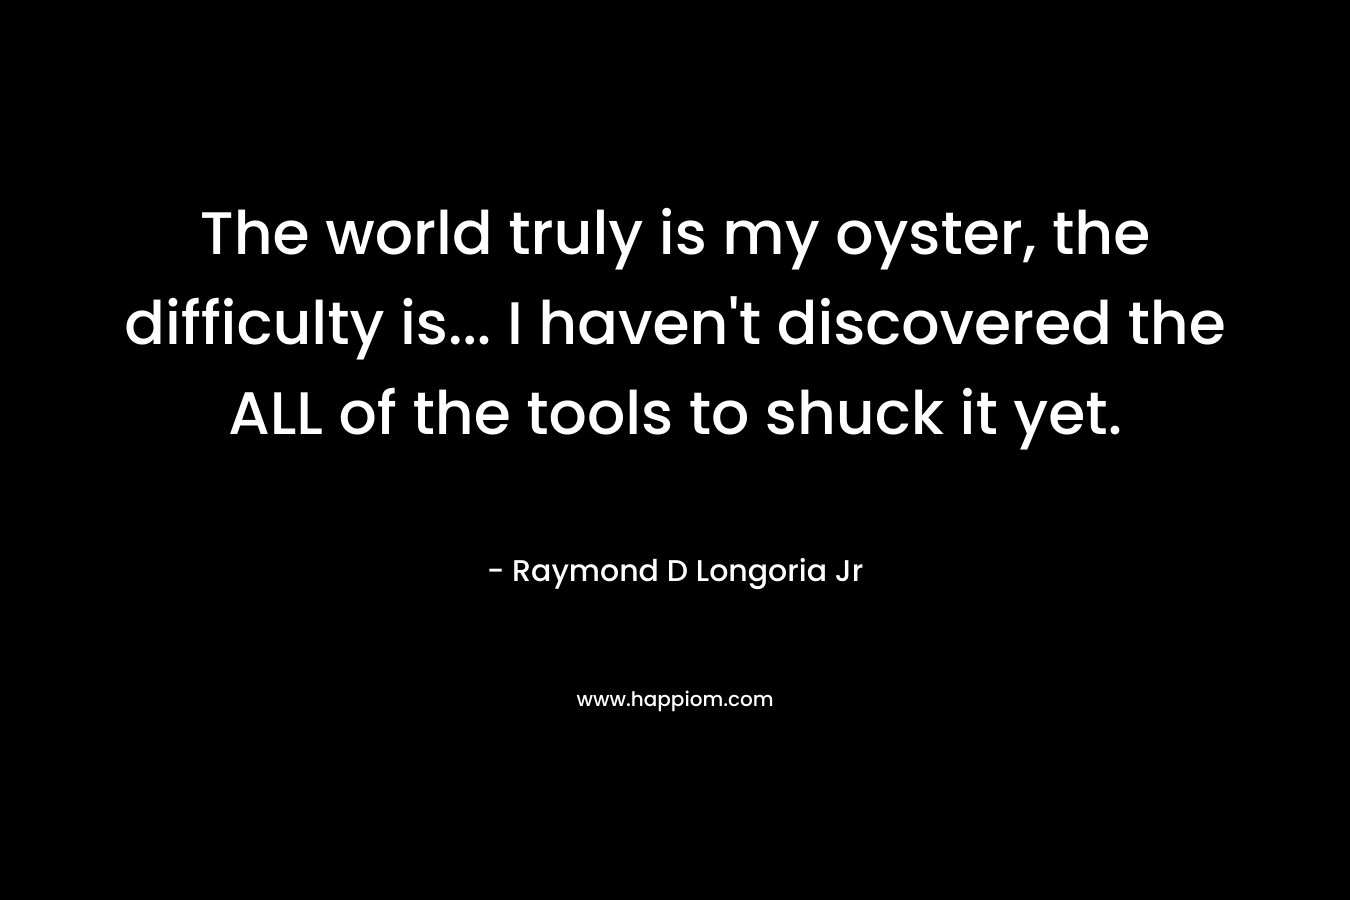 The world truly is my oyster, the difficulty is… I haven’t discovered the ALL of the tools to shuck it yet. – Raymond D Longoria Jr